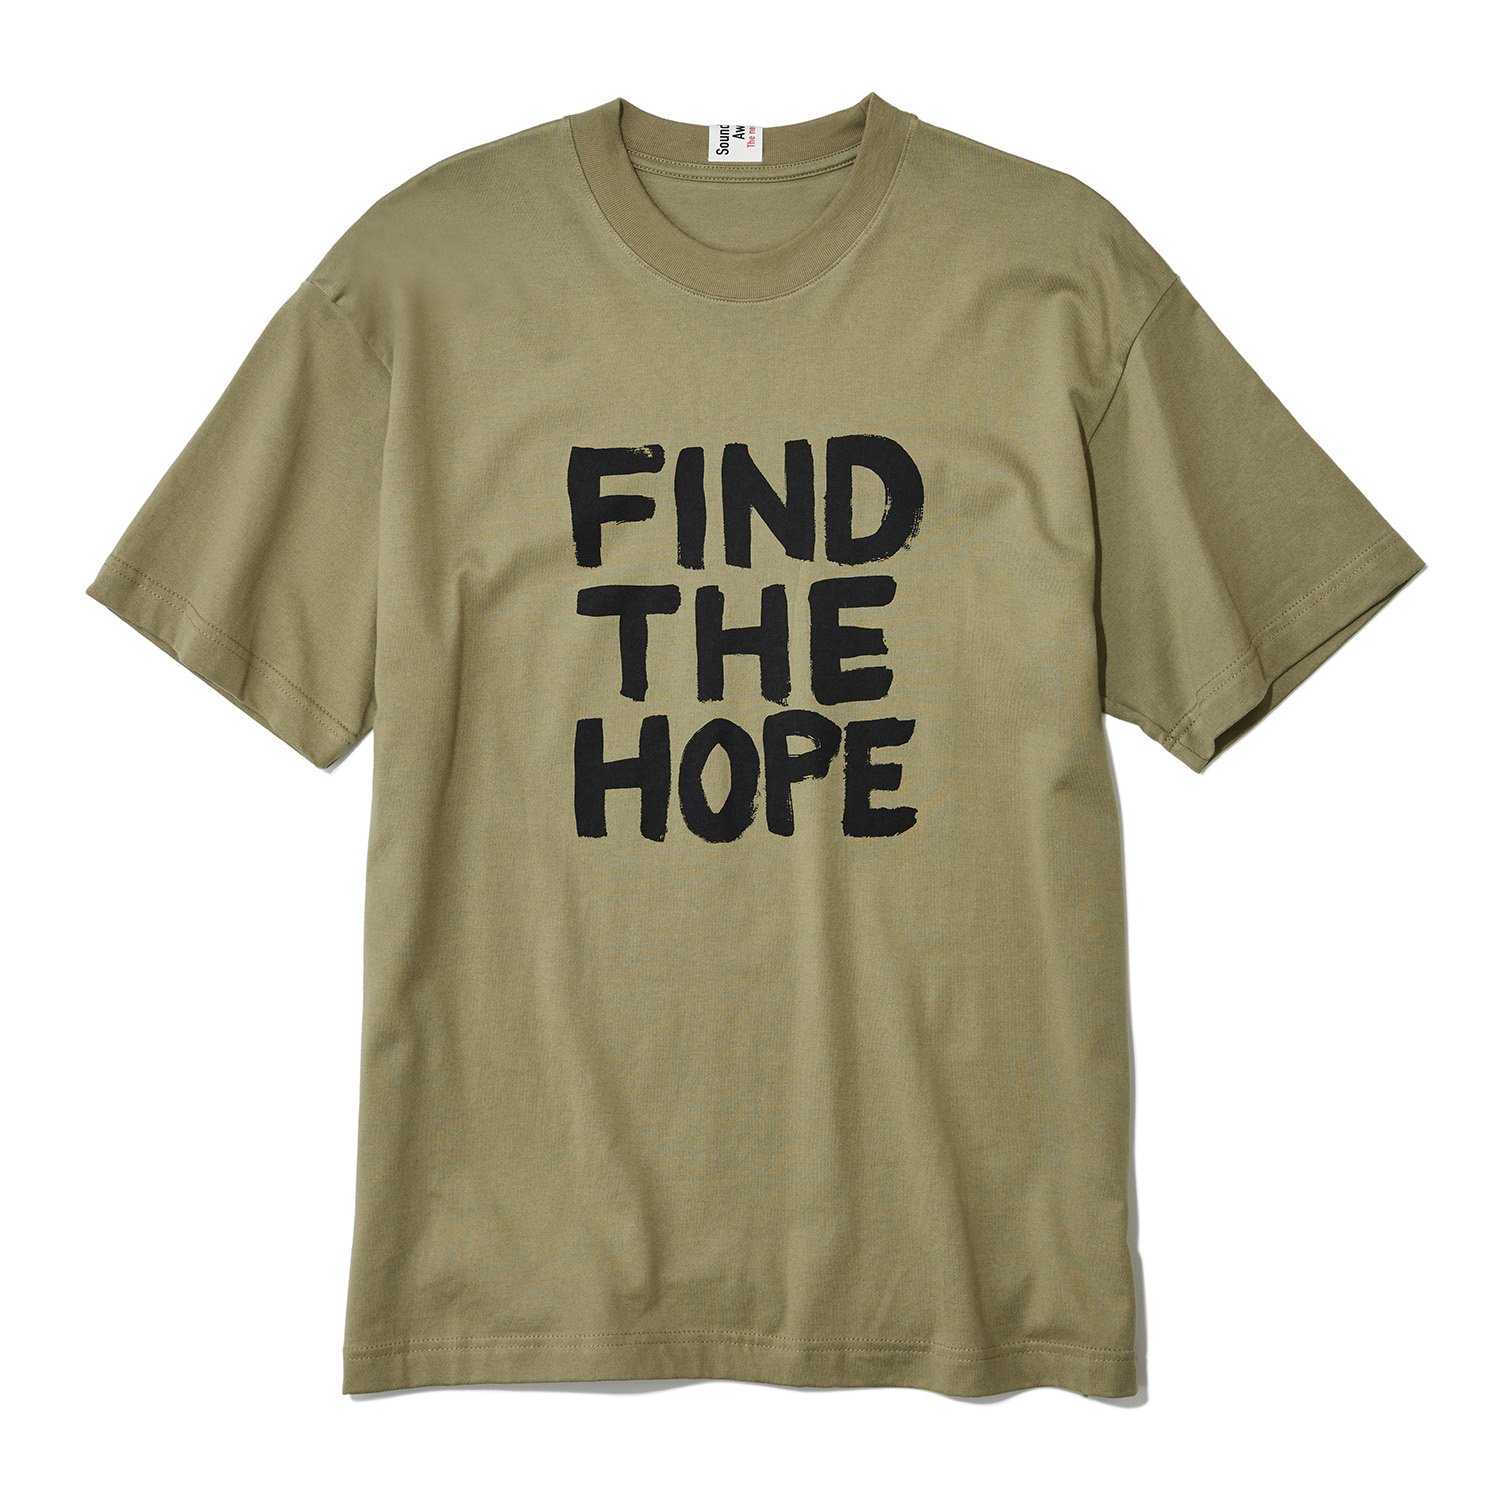 <img class='new_mark_img1' src='https://img.shop-pro.jp/img/new/icons8.gif' style='border:none;display:inline;margin:0px;padding:0px;width:auto;' />SOUNDS AWESOME / FIND THE HOPET-shirt